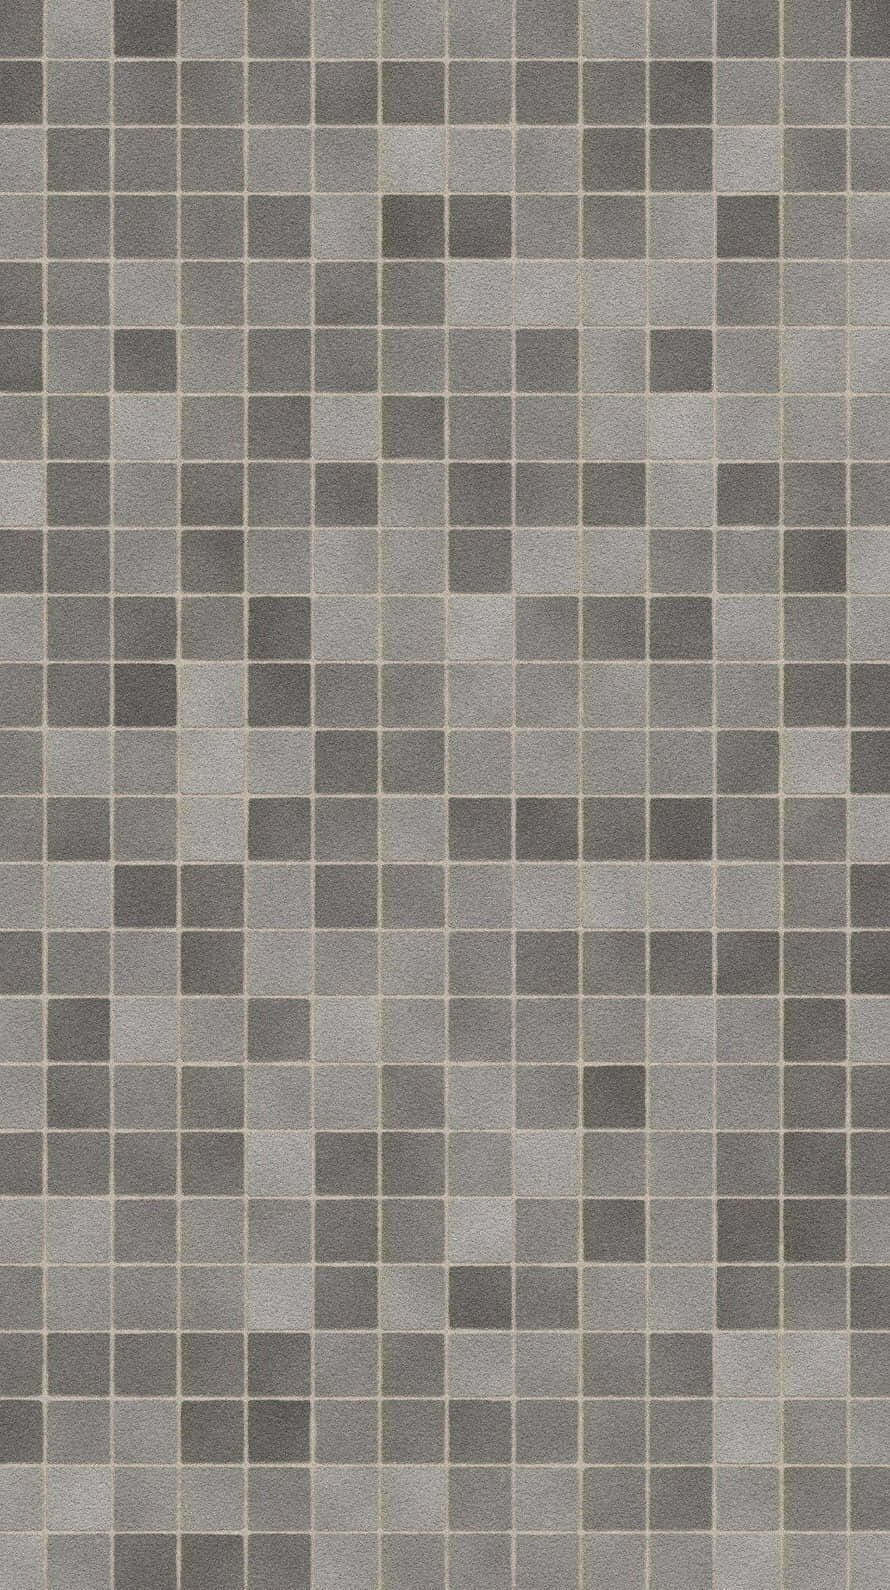 A Gray Tile With Squares On It Wallpaper